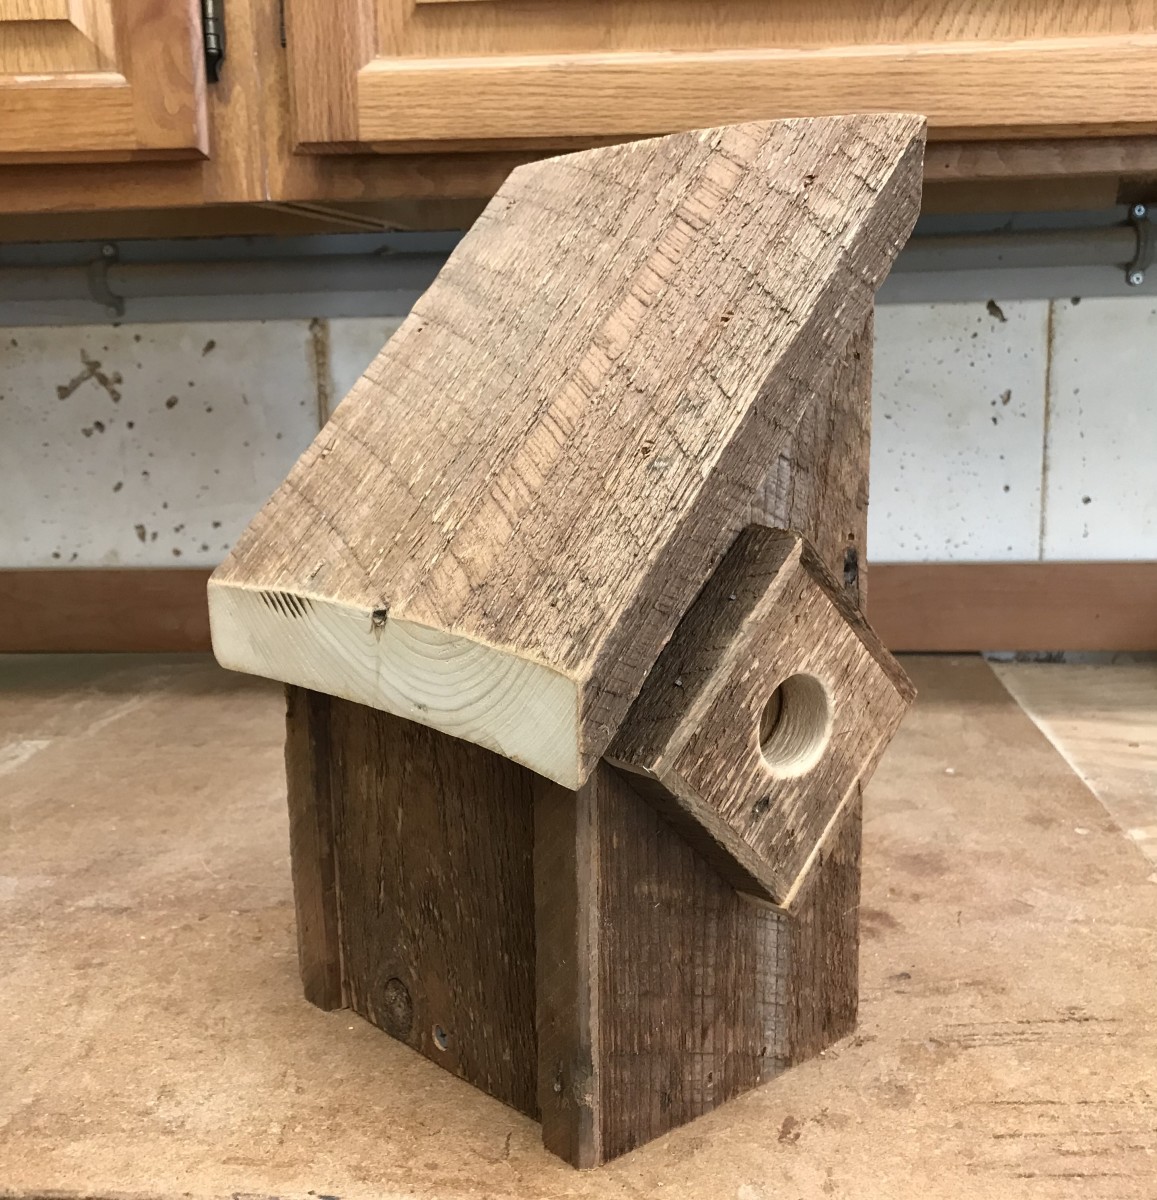 The finished birdhouse is ready for the garden.